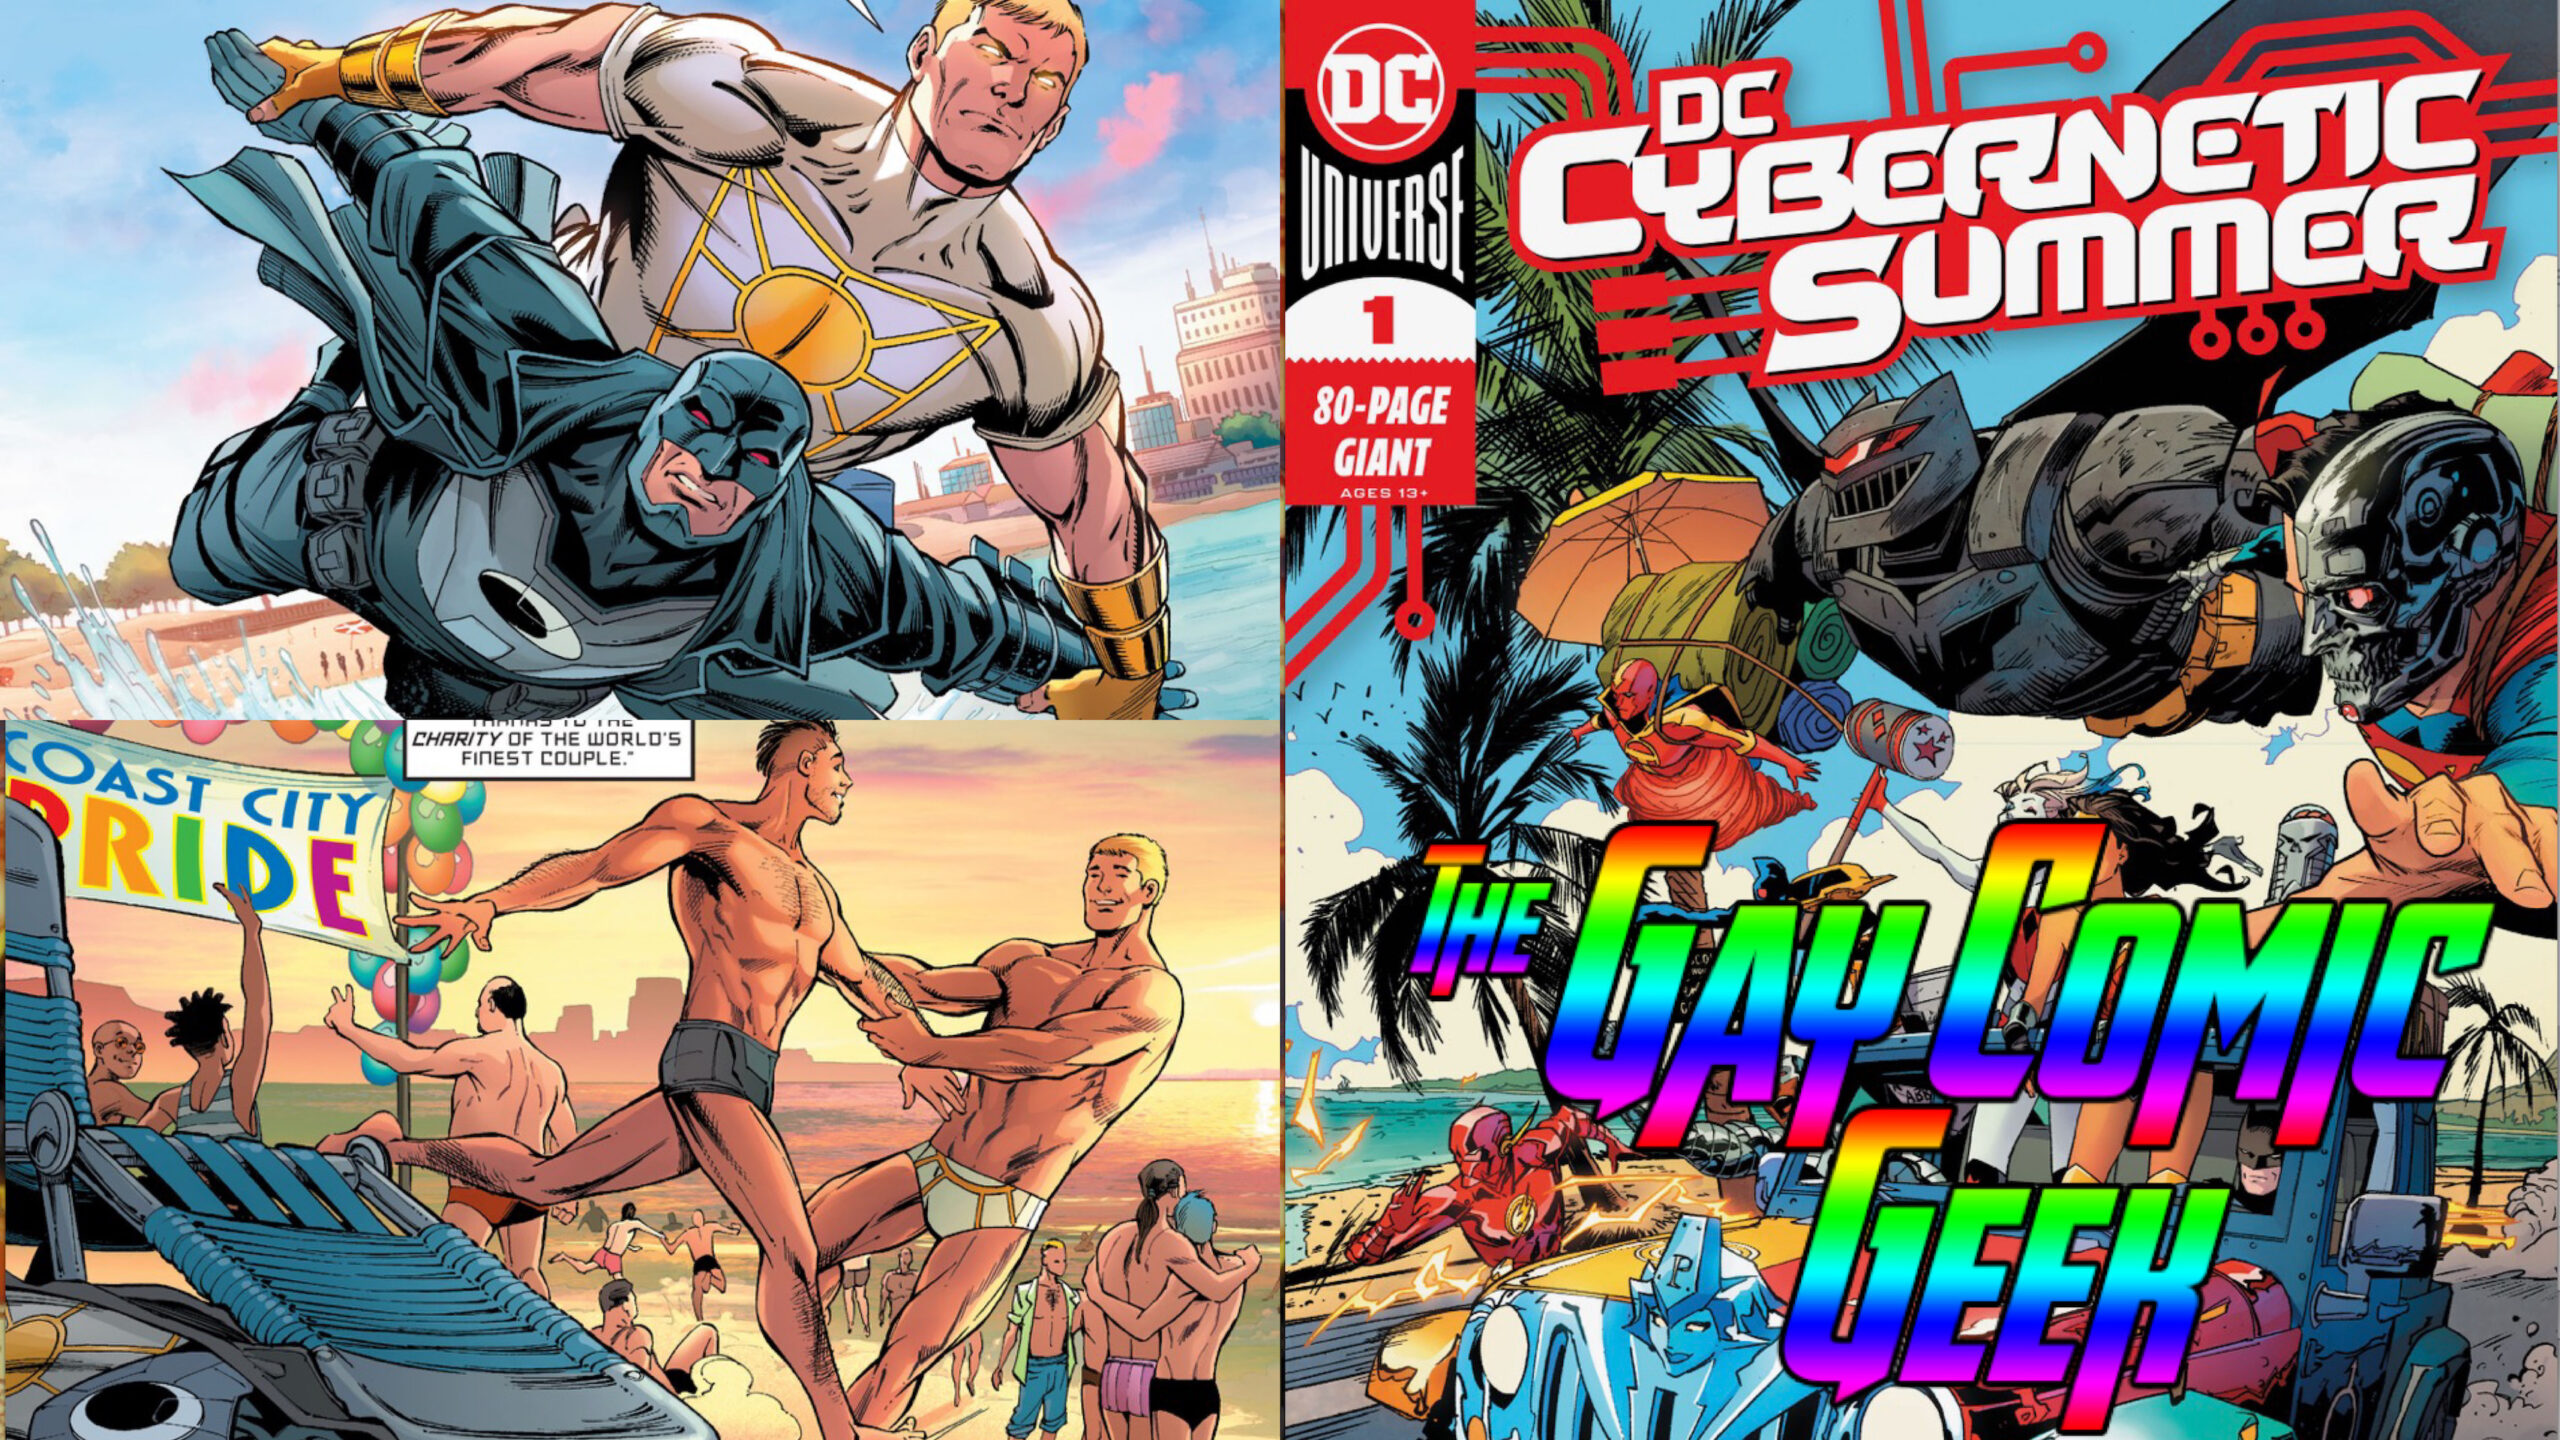 DC Cybernetic Summer Comic Book Review – Gay Couple Midnighter & Apollo Return (Briefly)